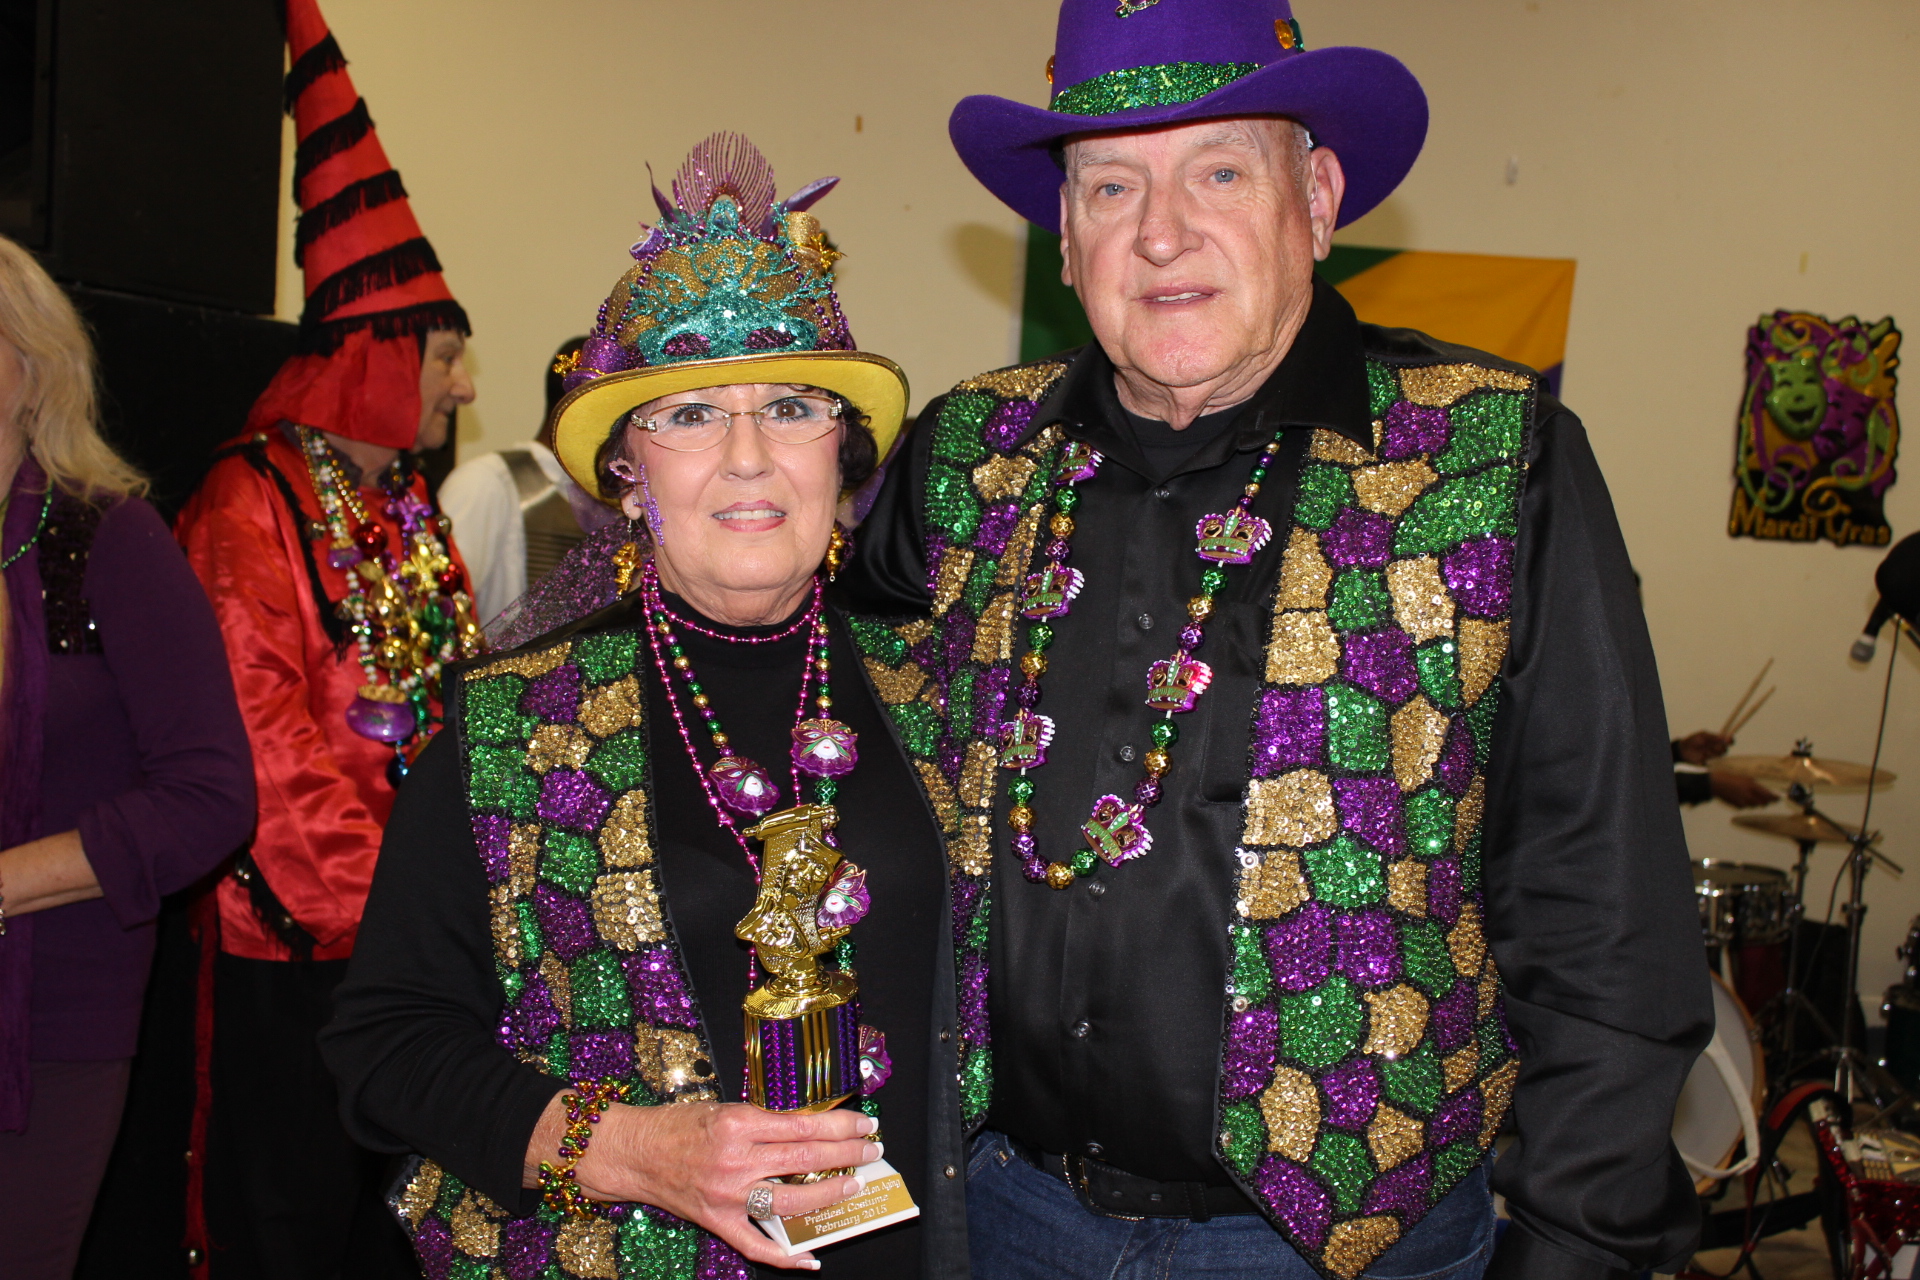 Council on Aging Mardi Gras Dance | EuniceToday Archive | The Eunice ...